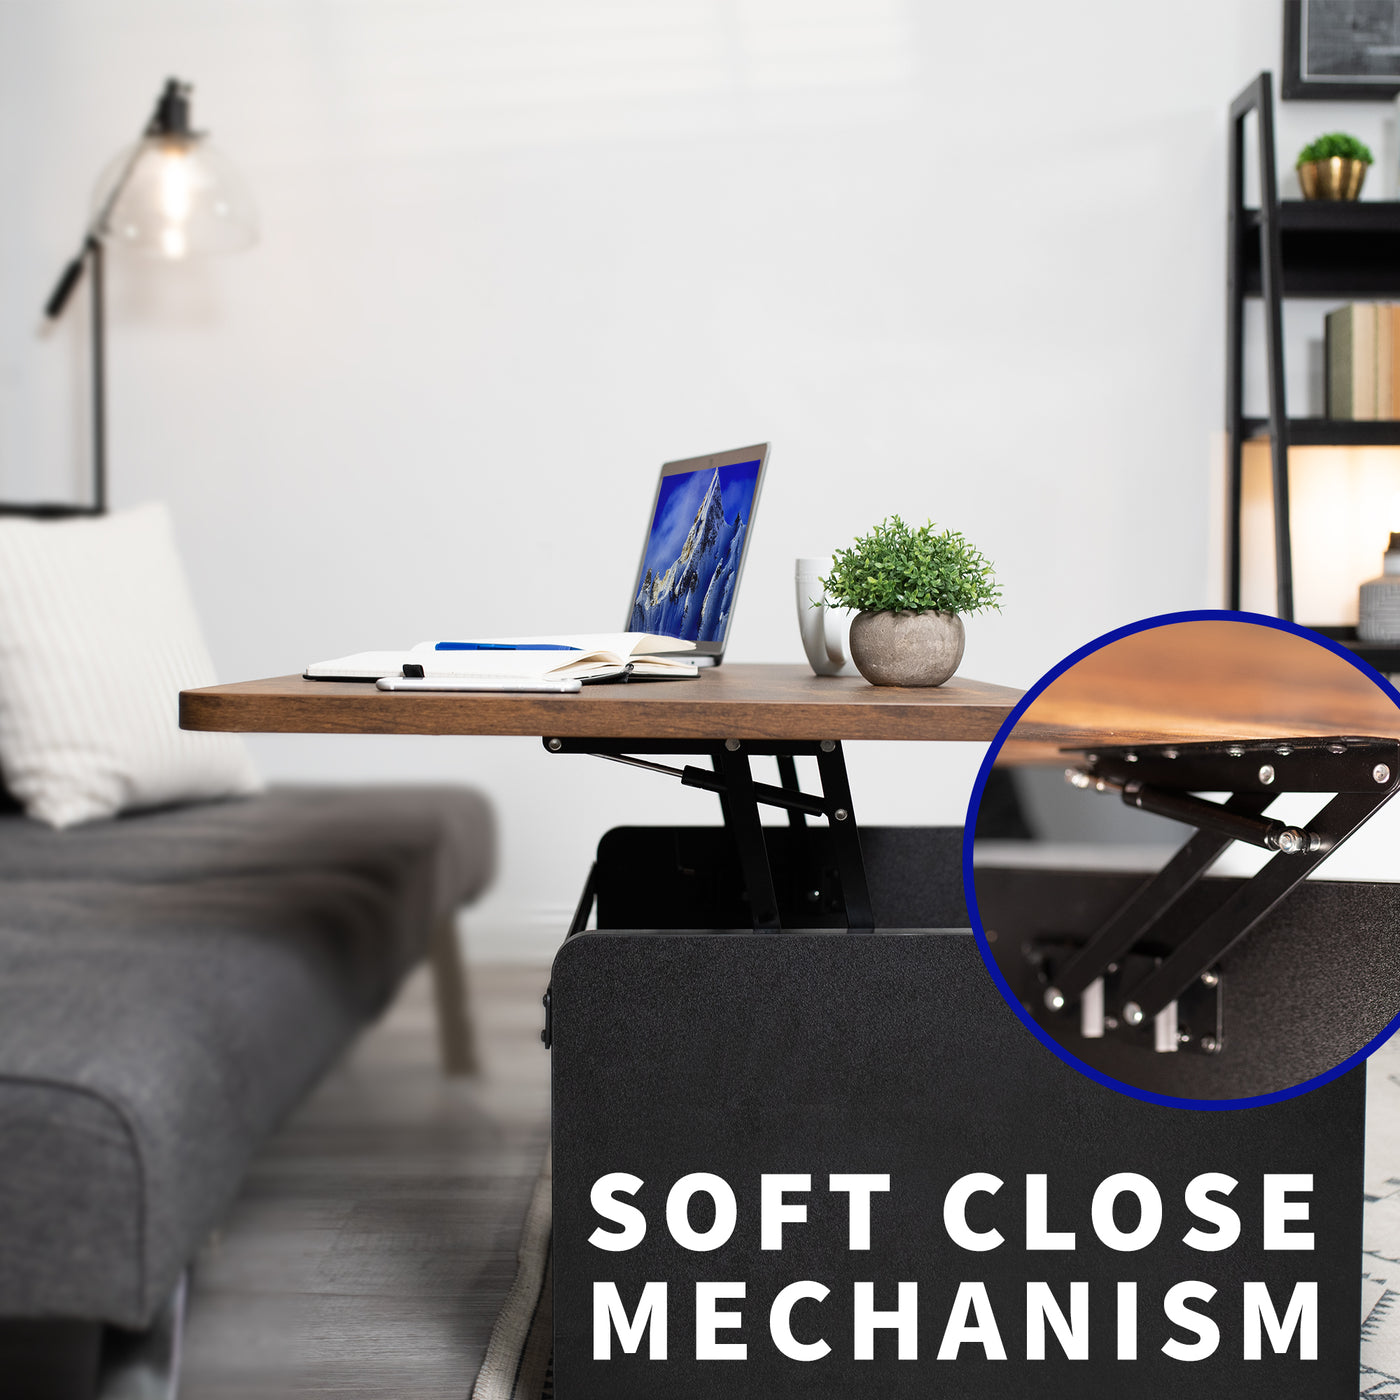 Keep your furniture and base frame safe with a soft close mechanism.